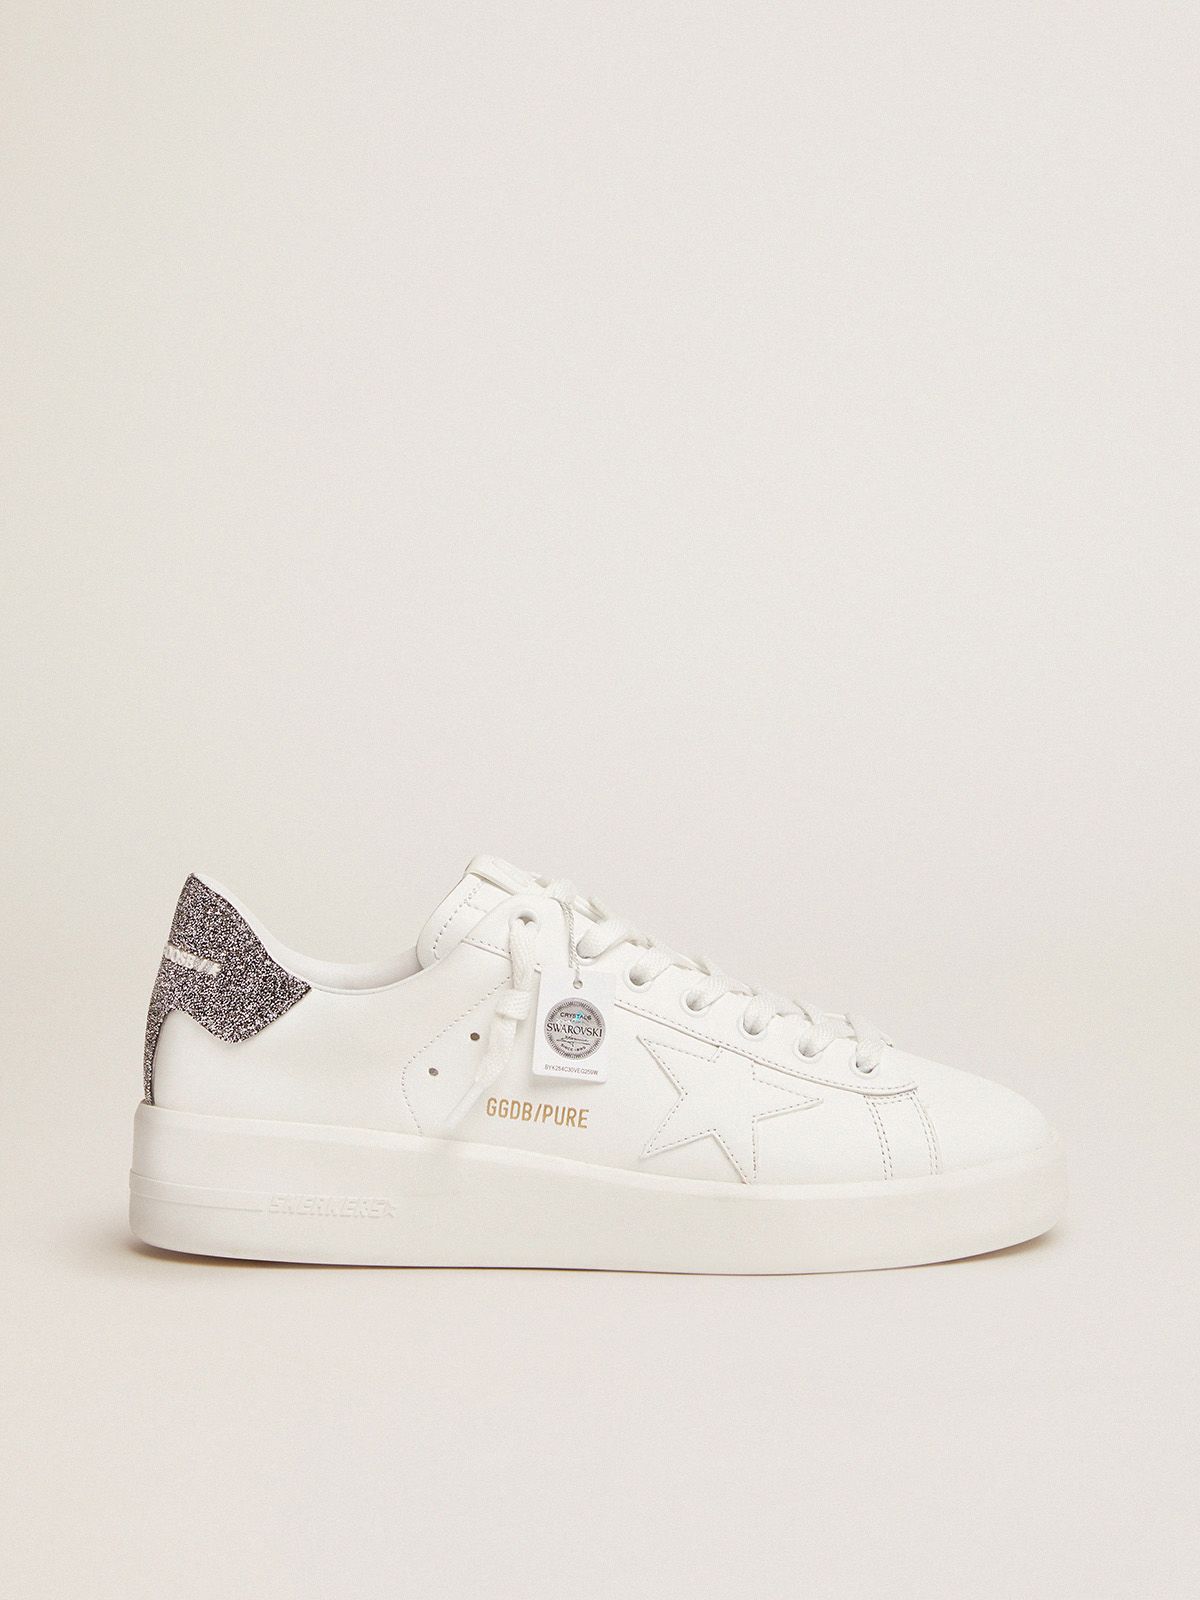 golden goose Purestar silver with heel tab white leather sneakers in crystal